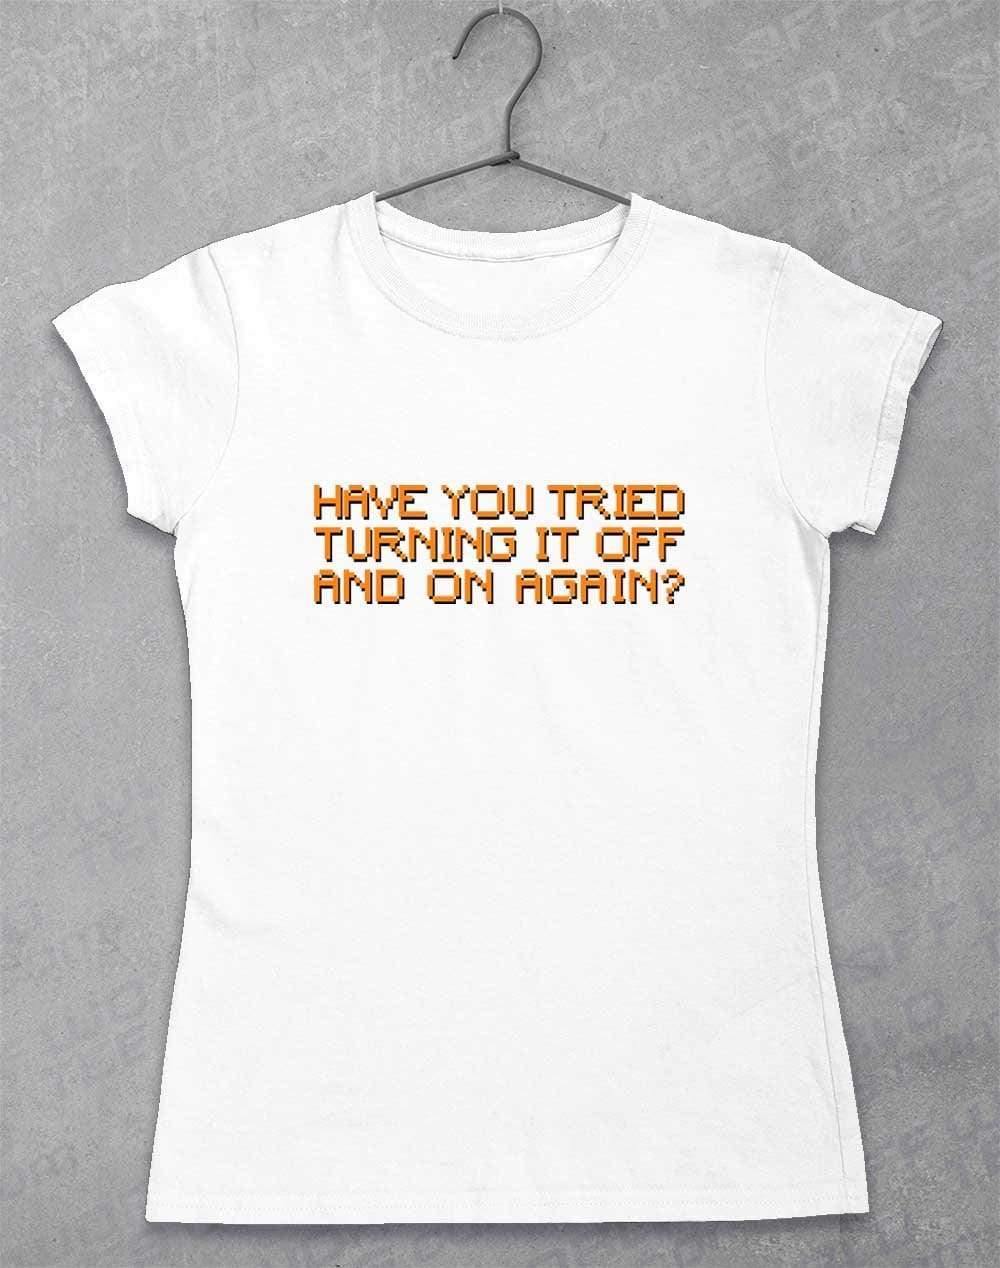 Off and On Again Women's T-Shirt 8-10 / White  - Off World Tees